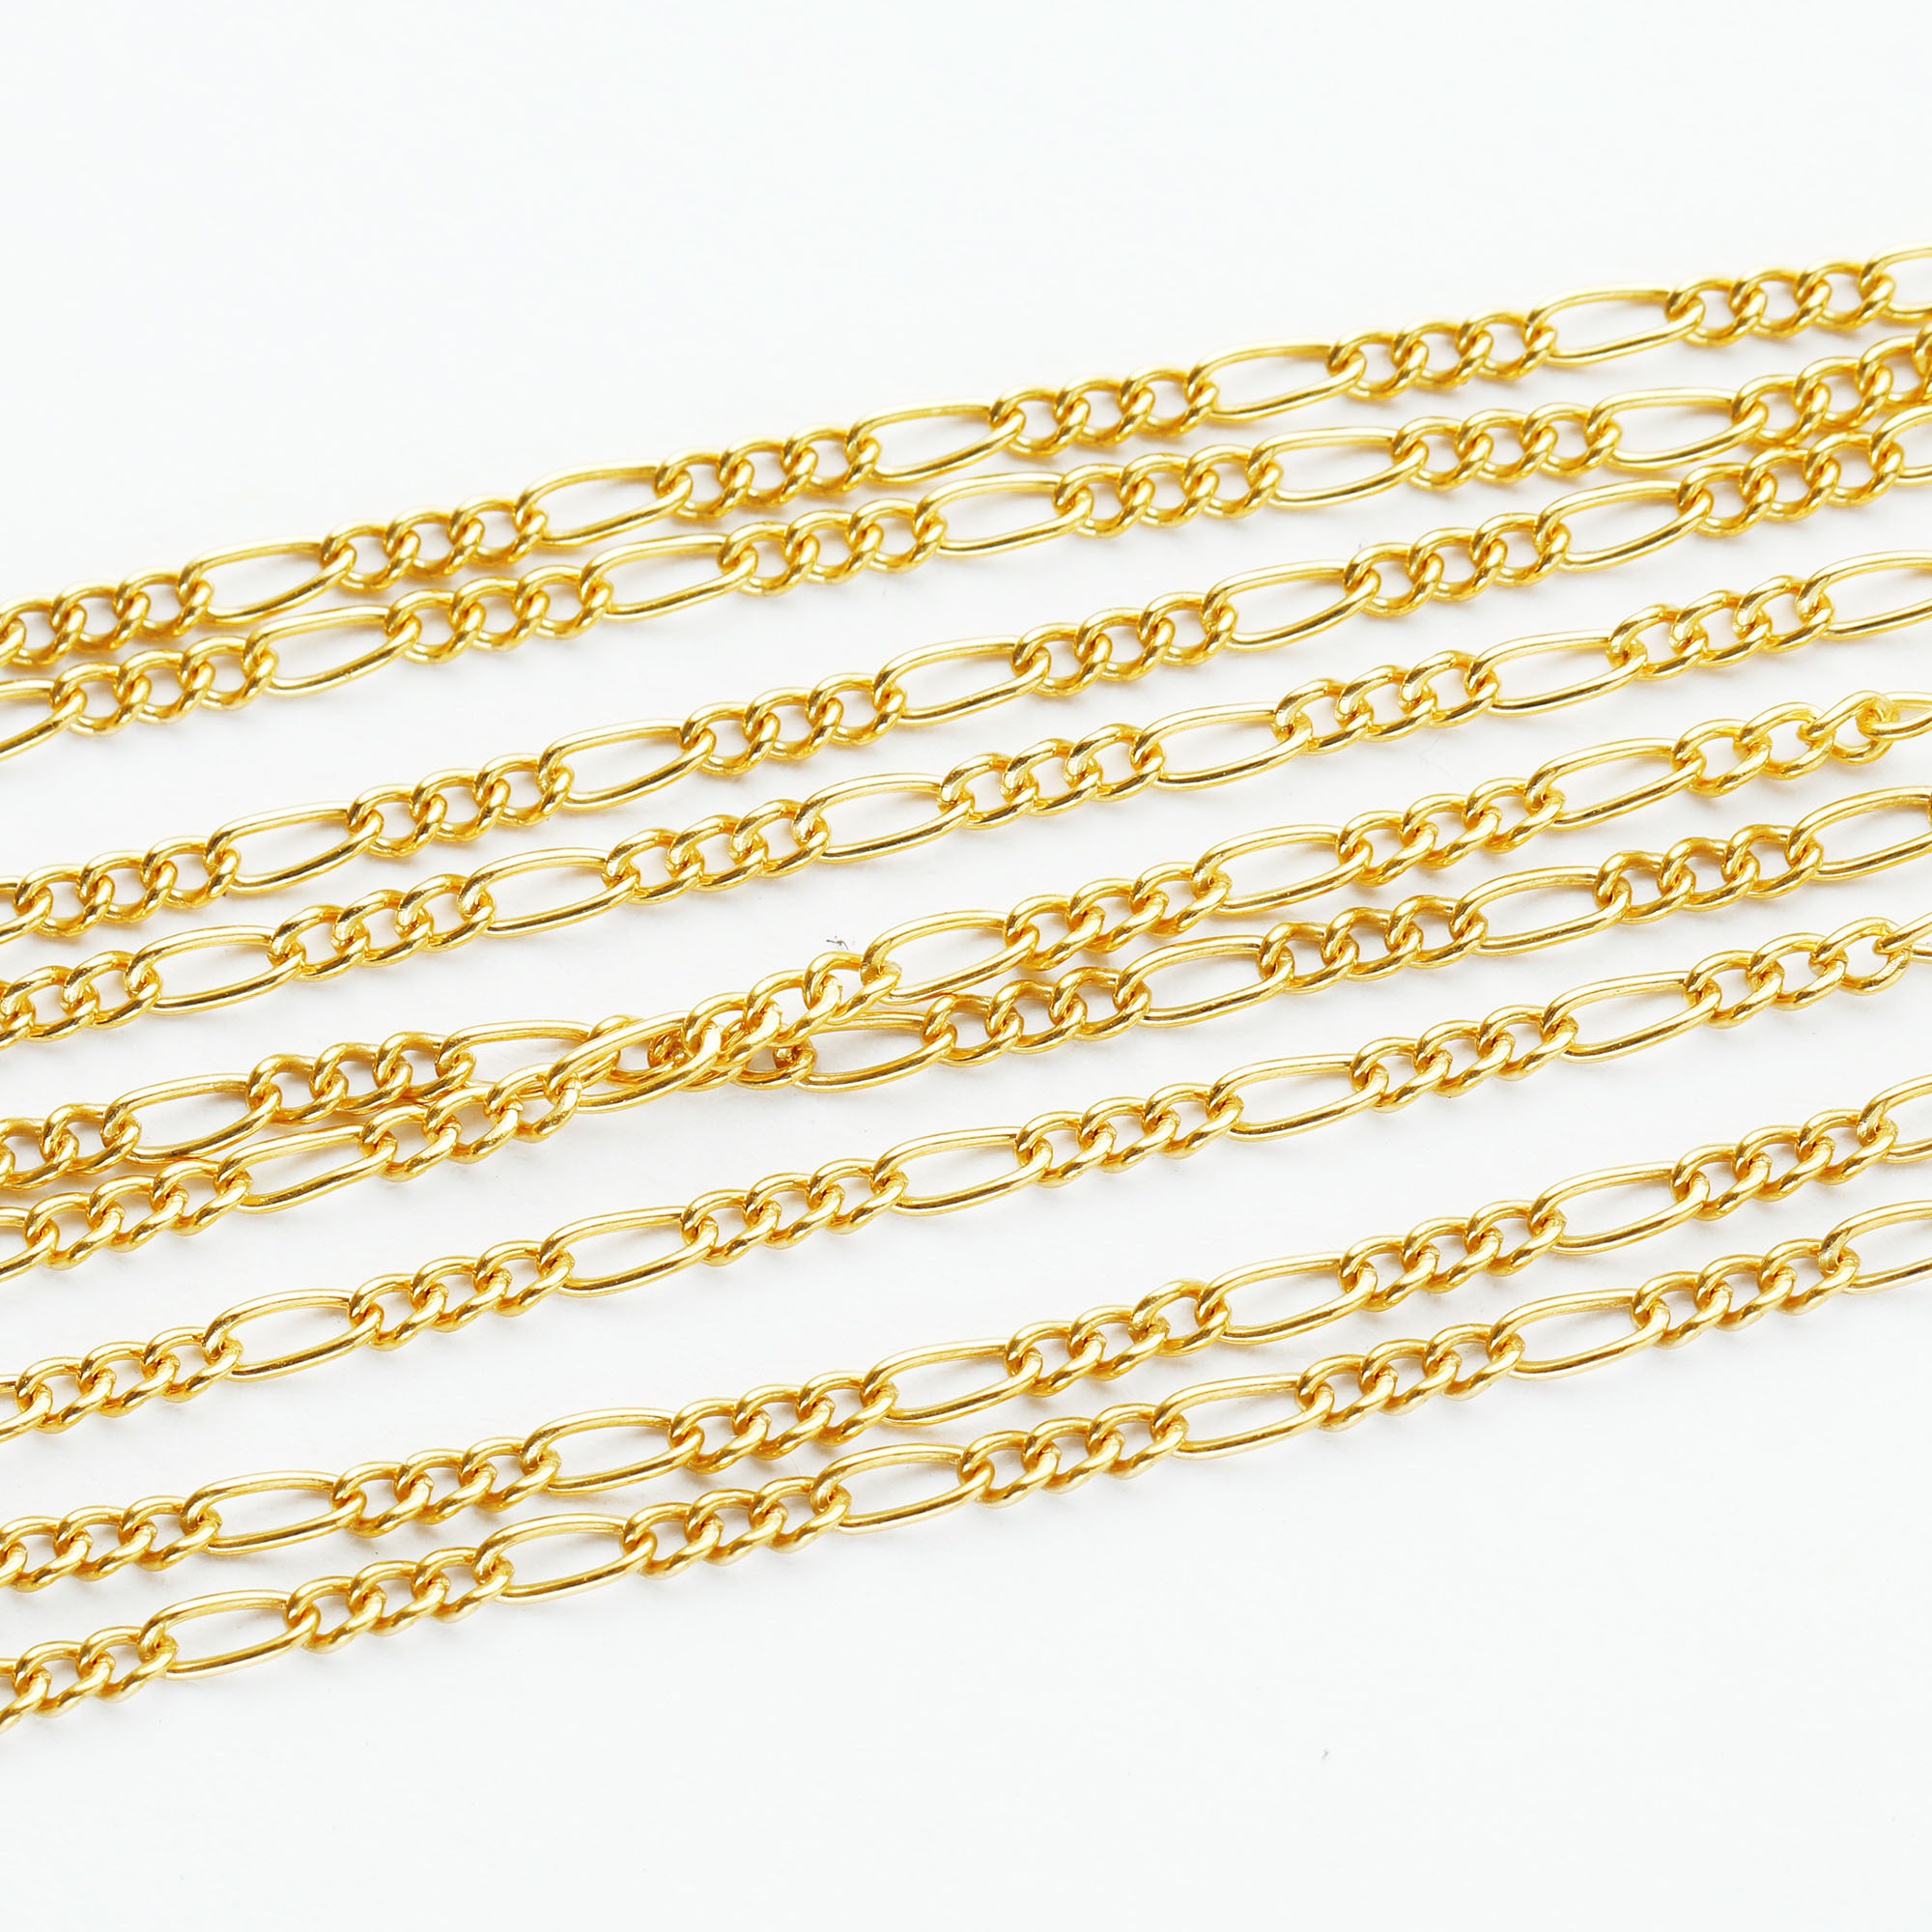 0.5Meter Figaro Chain Necklace,14k Gold Filled Necklace Chain,Simple Necklace Chain,DIY Necklace Supplies 1325012 - Click Image to Close